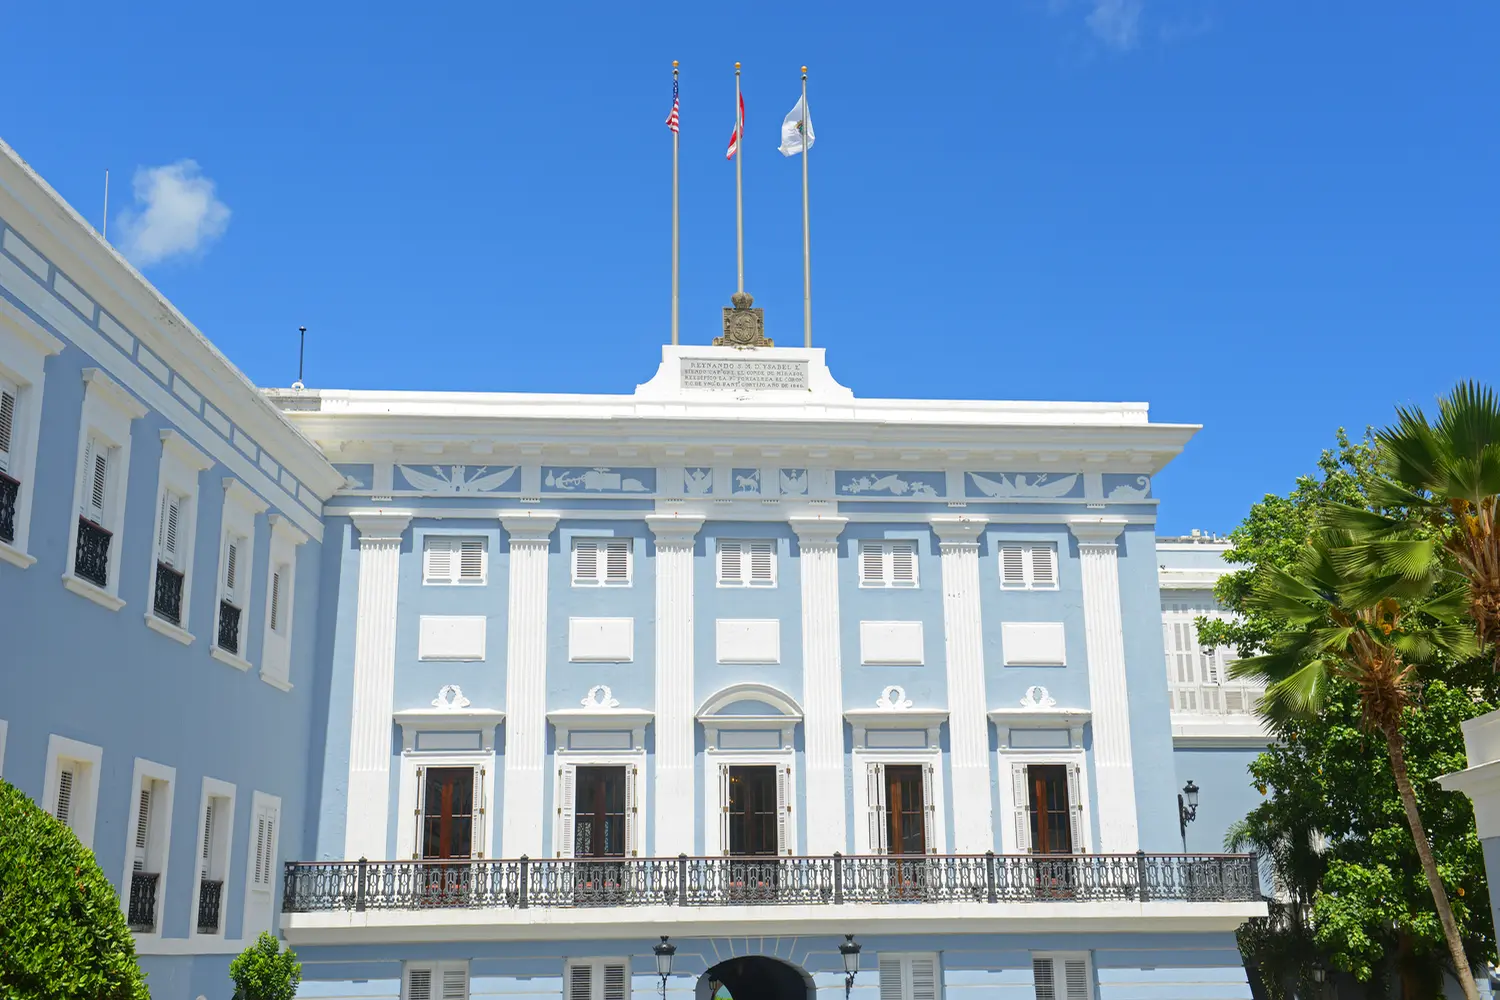 La Fortaleza is a UNESCO World Heritage Site in Old San Juan, Puerto Rico. This building is the official residence of the Governor of Puerto Rico.